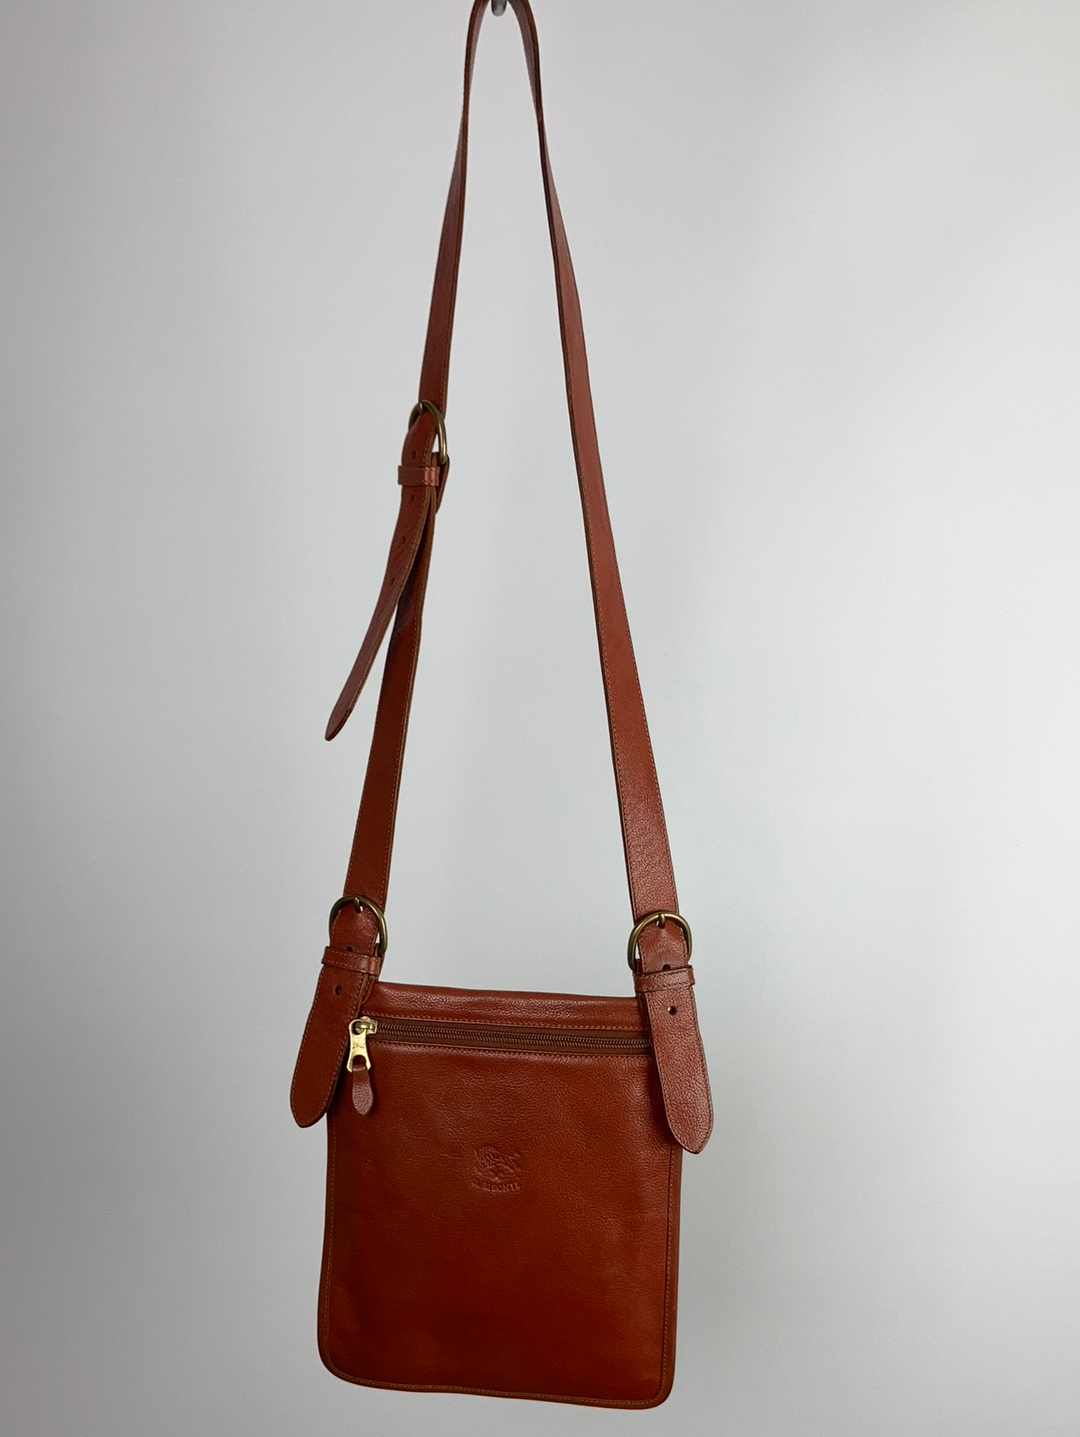 IL Bisonte for Liberty tan leather bag